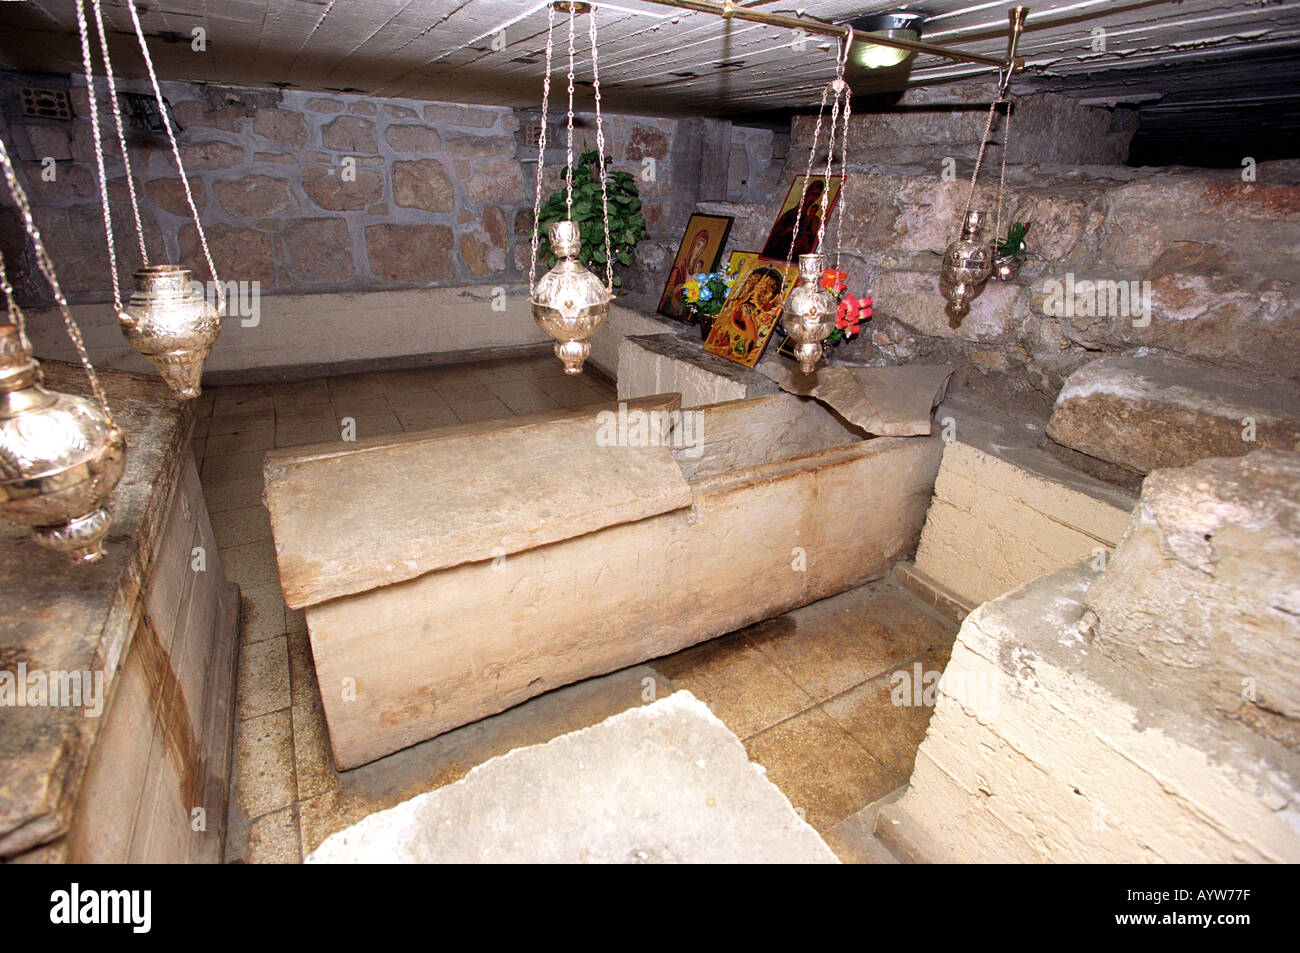 The coffin of St Lazarus in the crypt beneath the Church of St Lazarus in Larnaca Cyprus Stock Photo